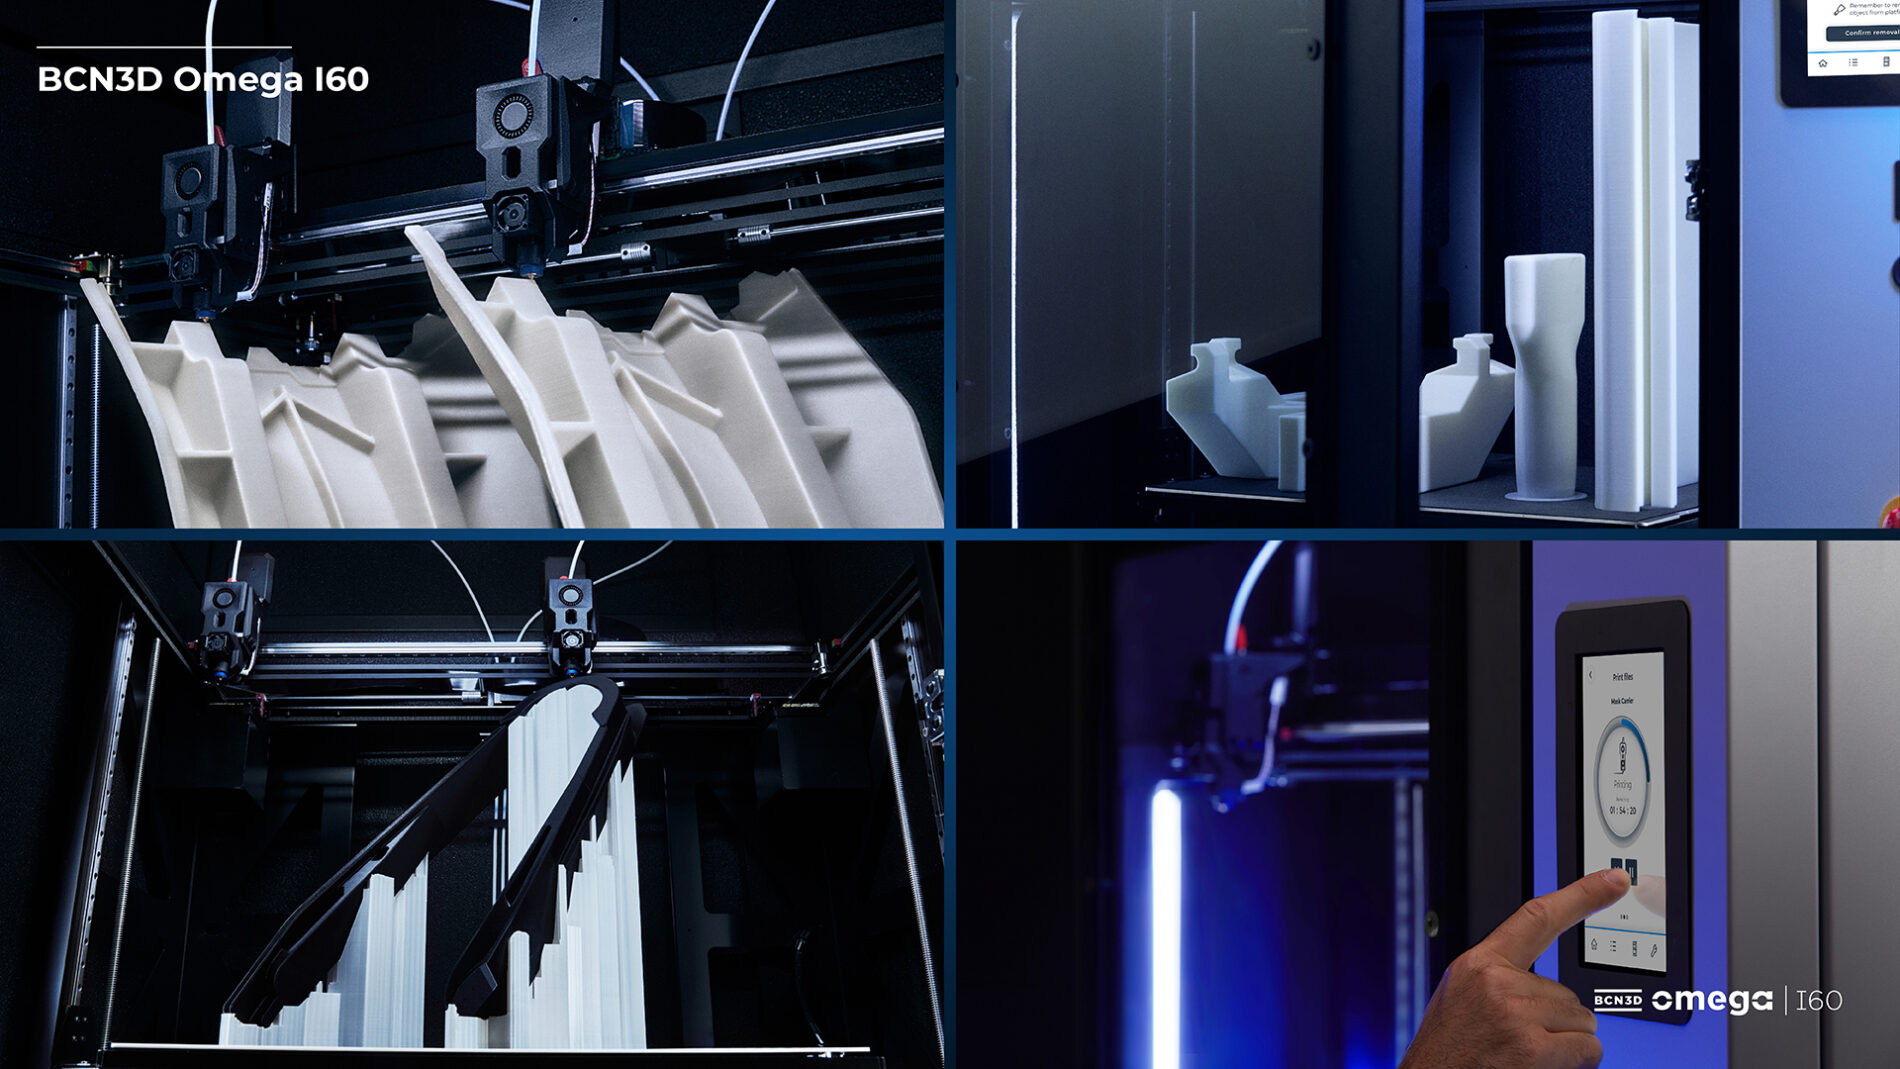 Case Study: How Louis Vuitton Uses 3D Printing